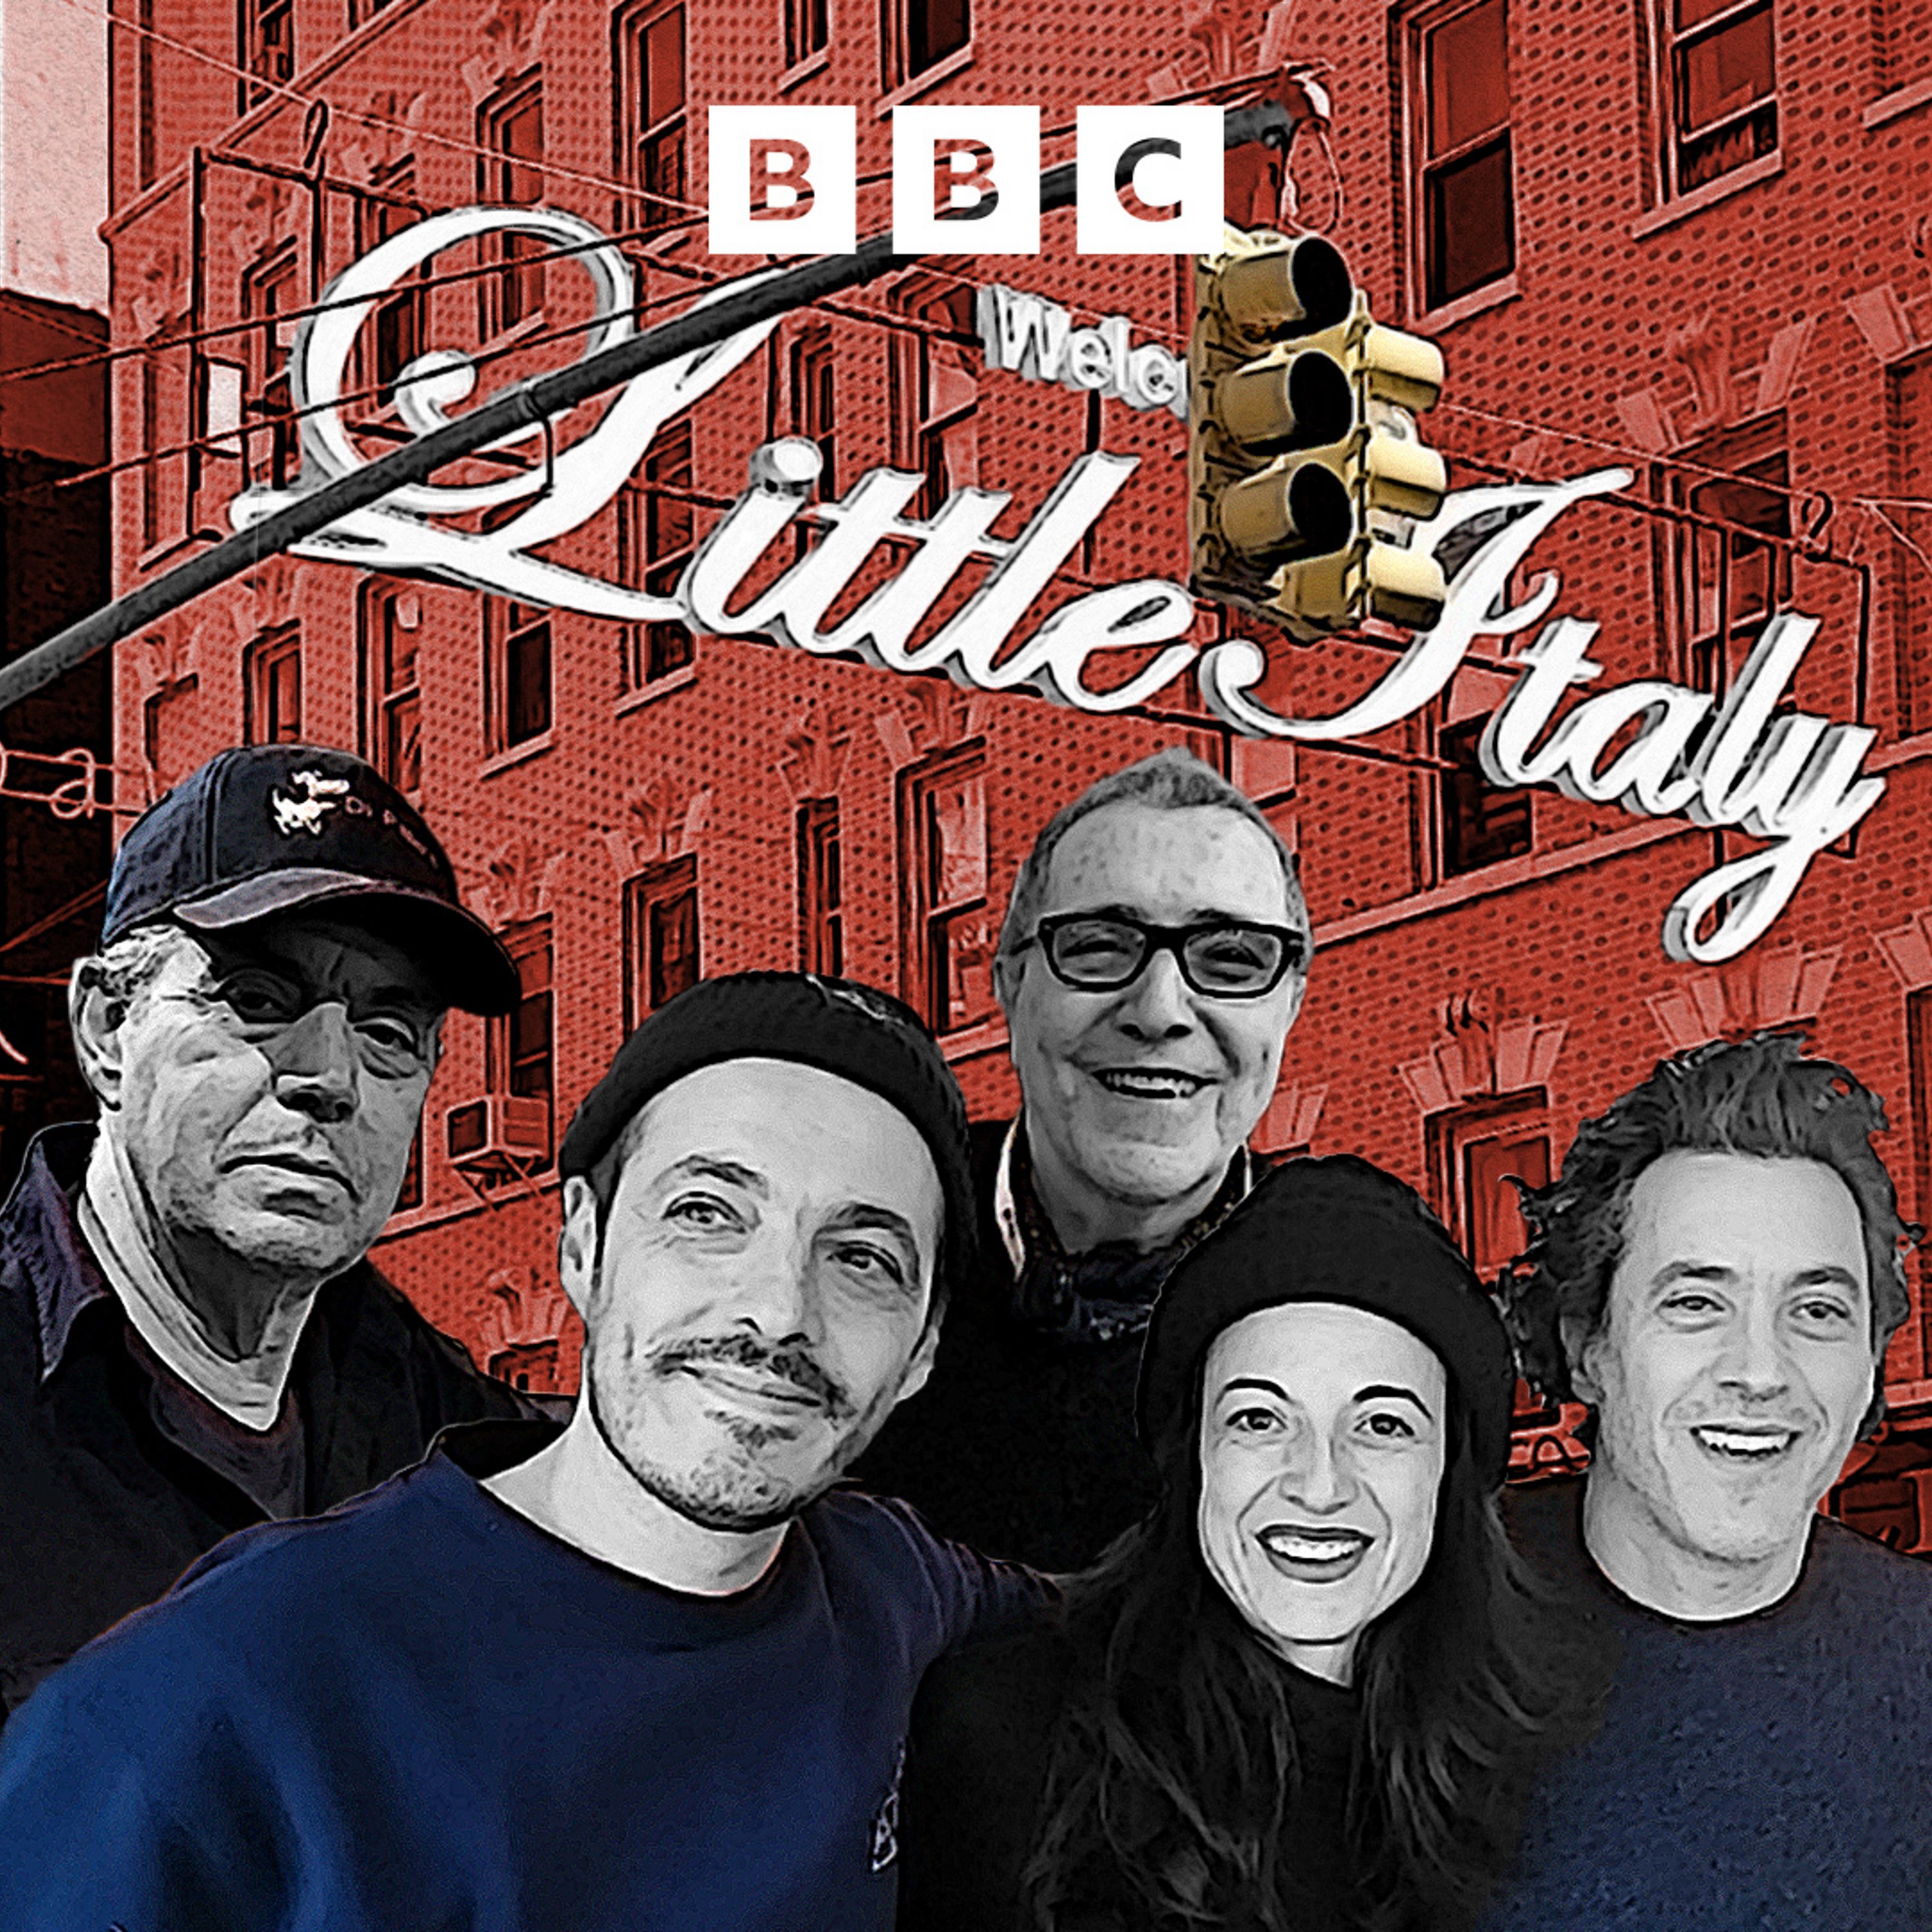 The Little Italy story